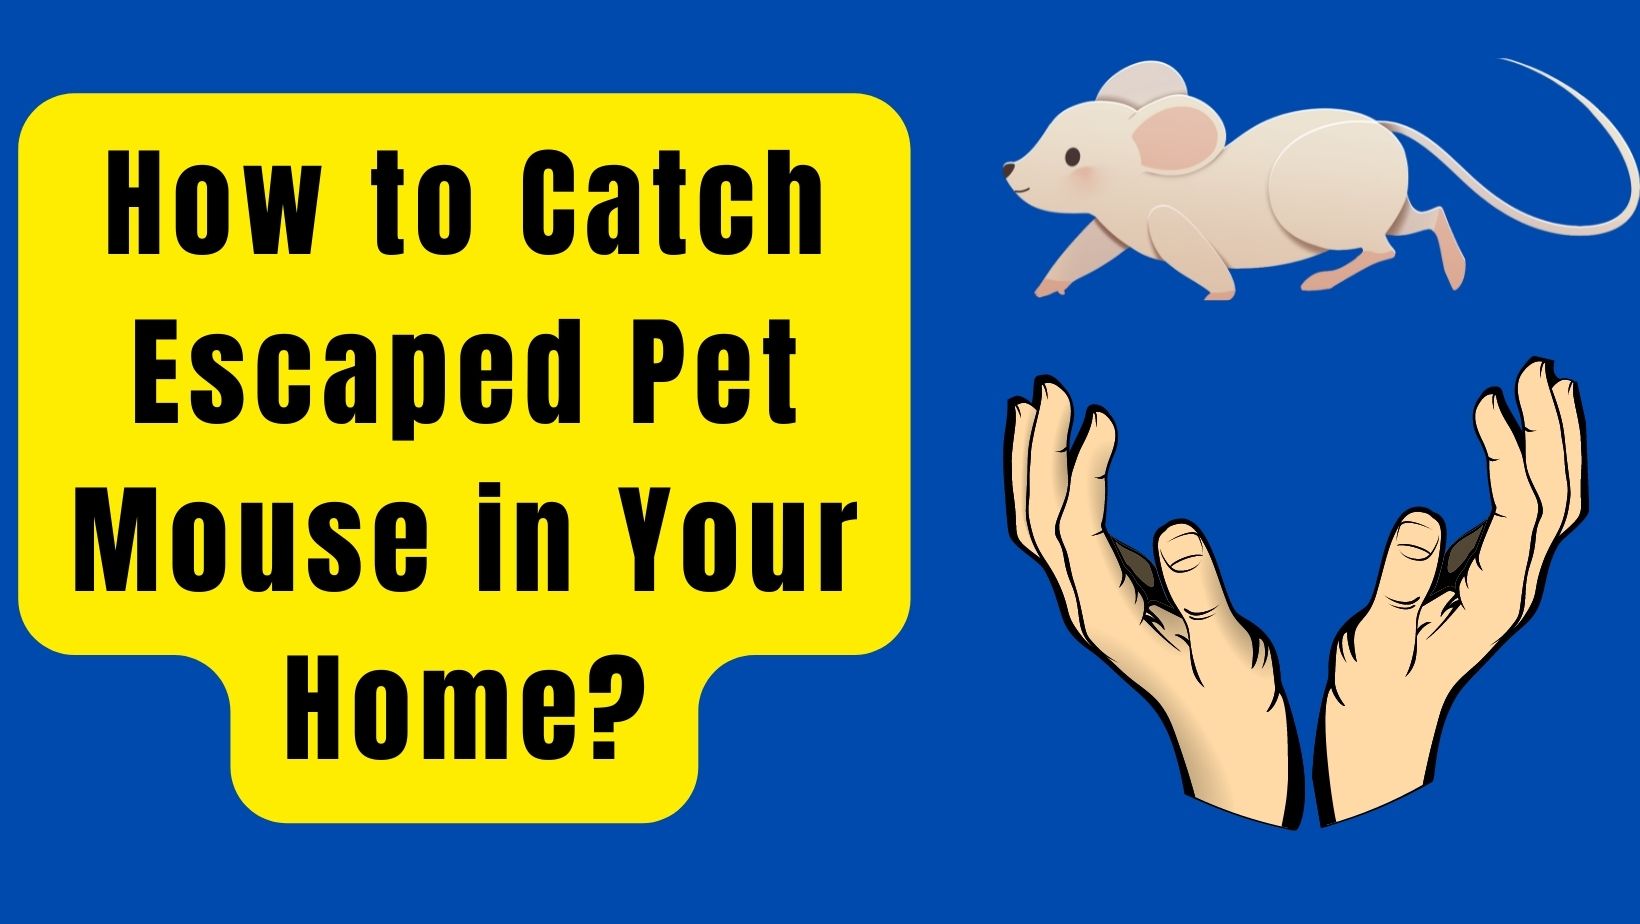 5 Ways To Catch Escaped Pet Mouse in Home?